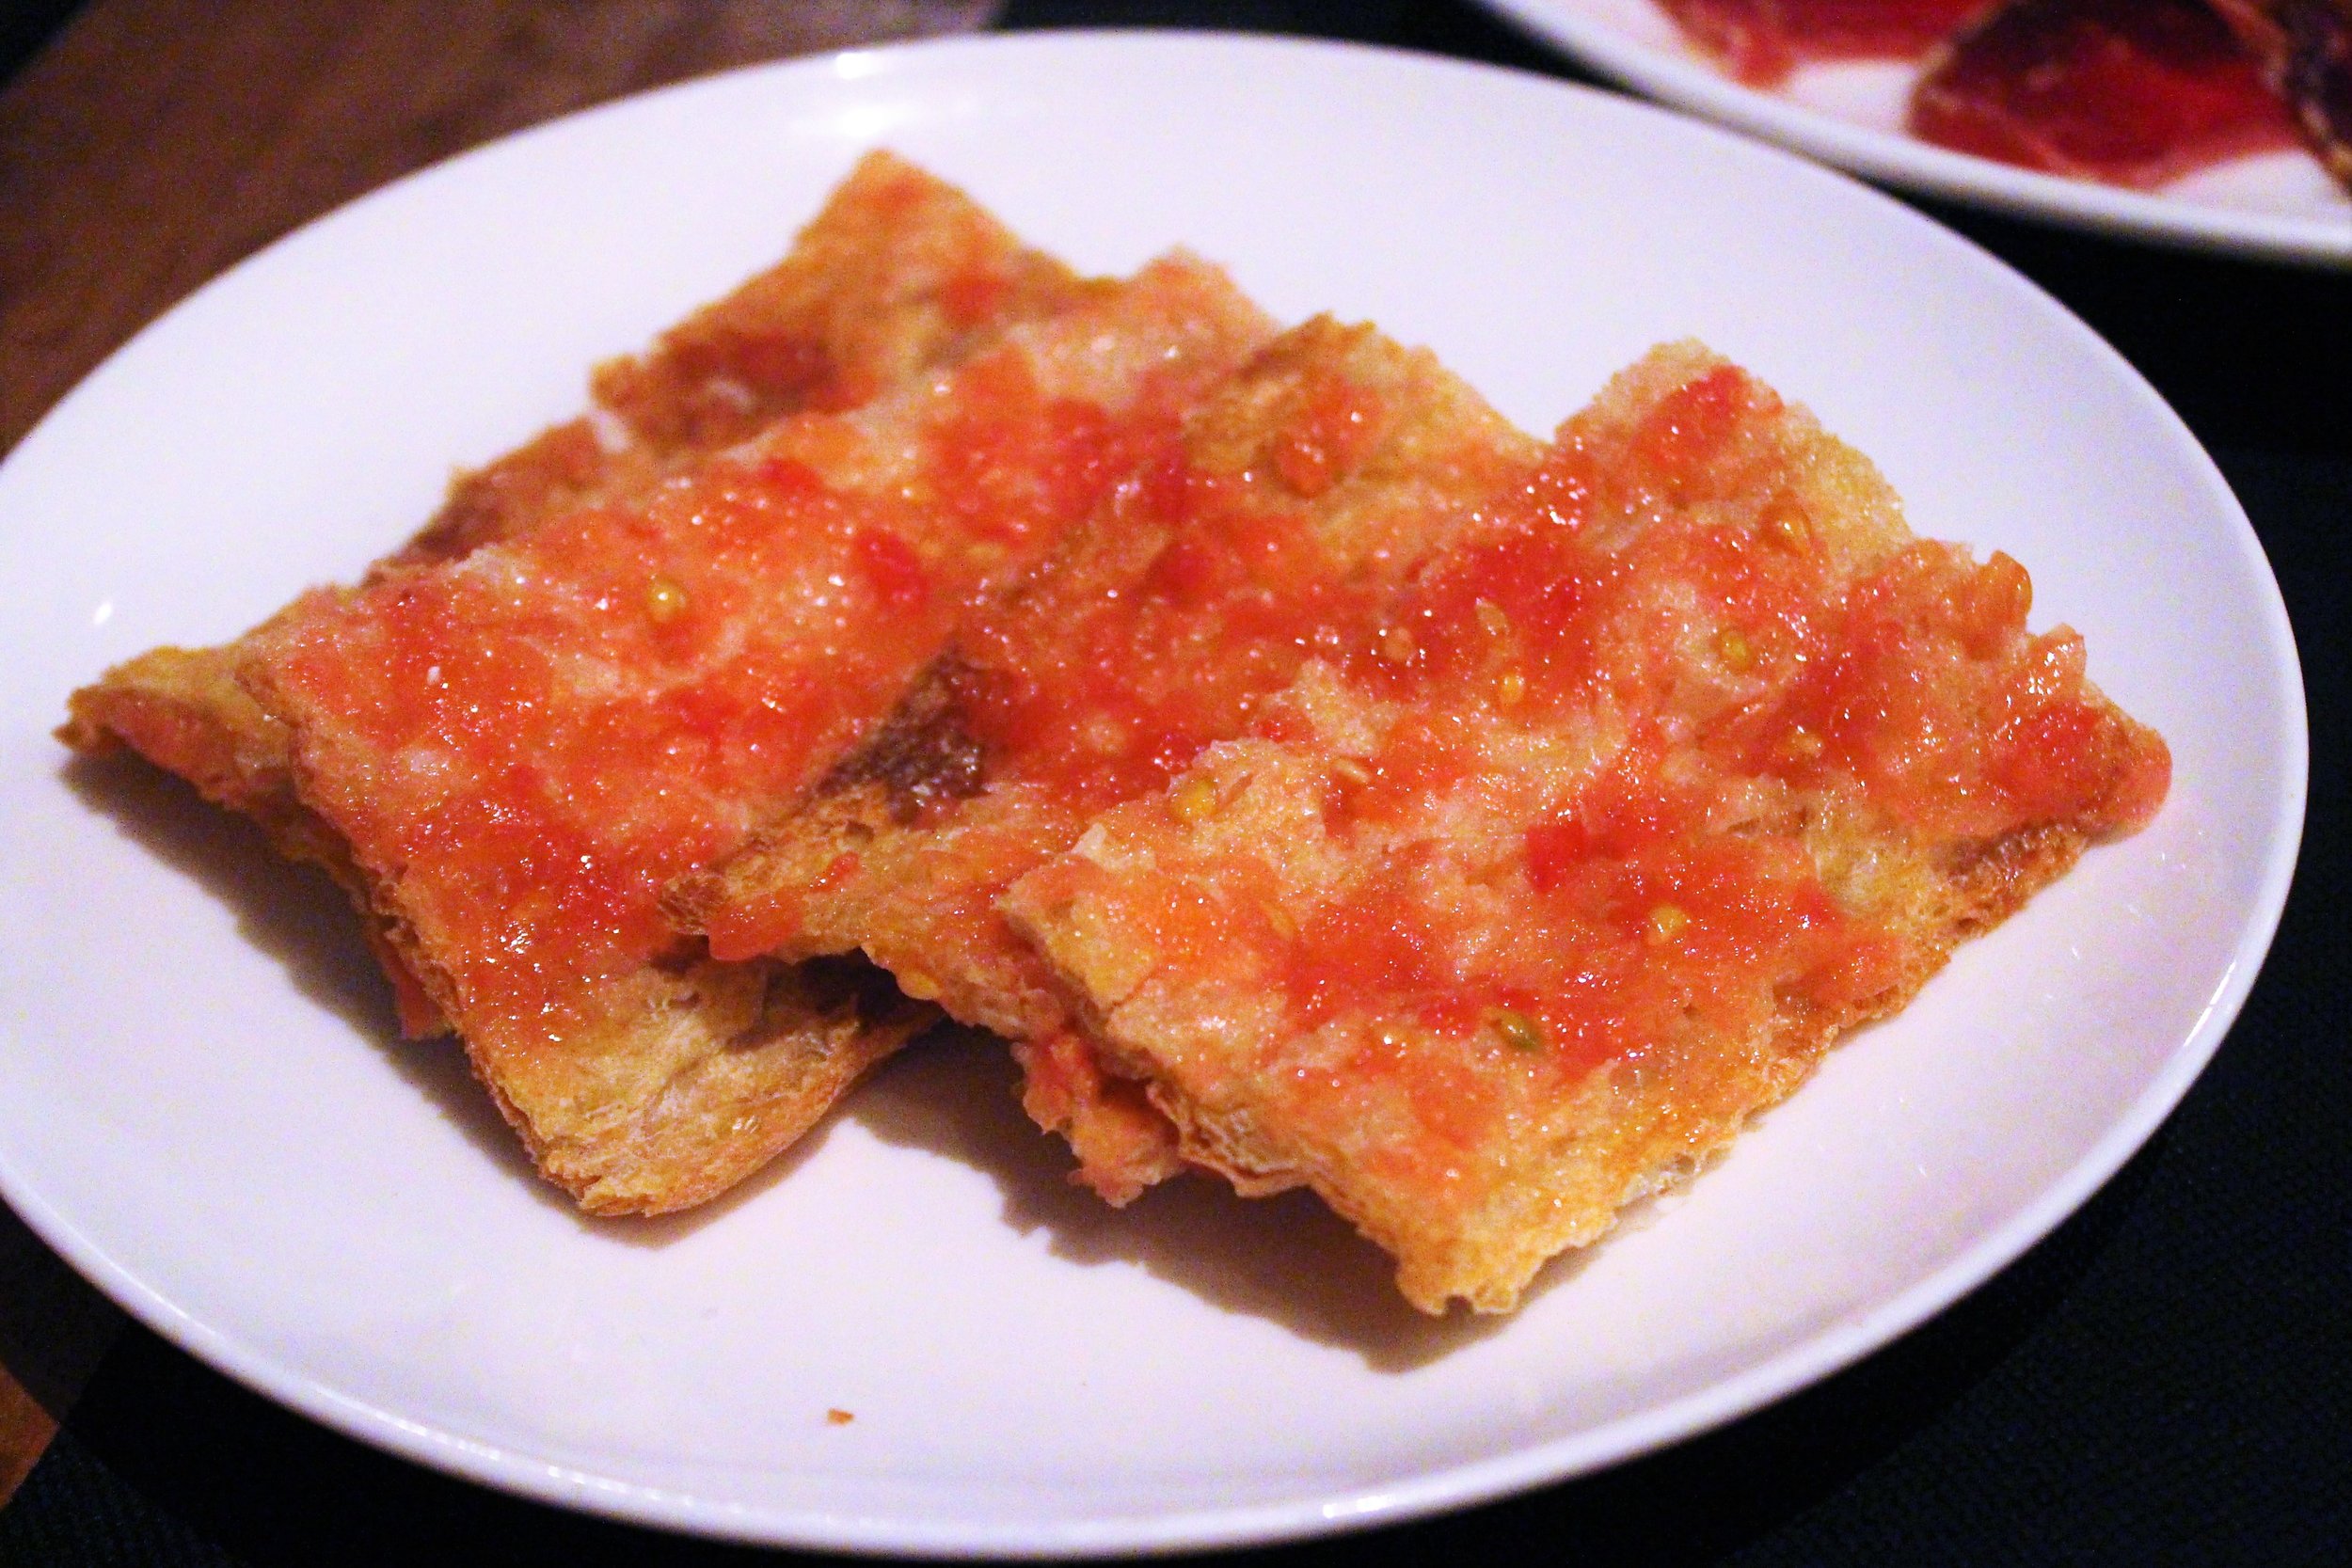 Toasted Bread with Tomato (Pan Con Tomate) at Eldiset in Barcelona